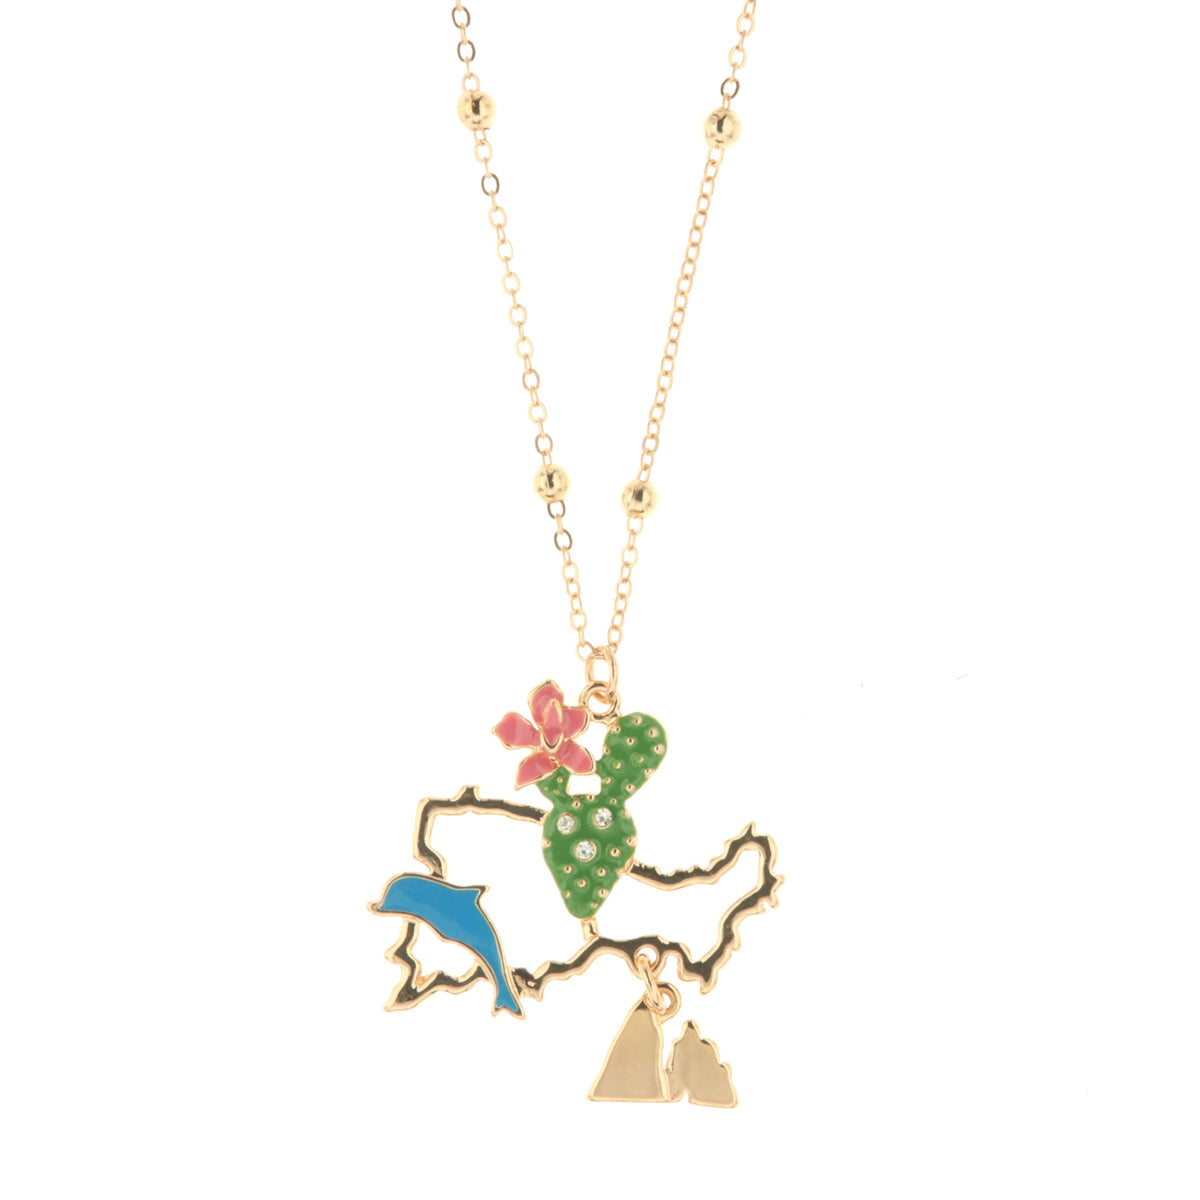 Metal necklace with Campania -shaped pendant with cactus, dolphin and Faraglioni